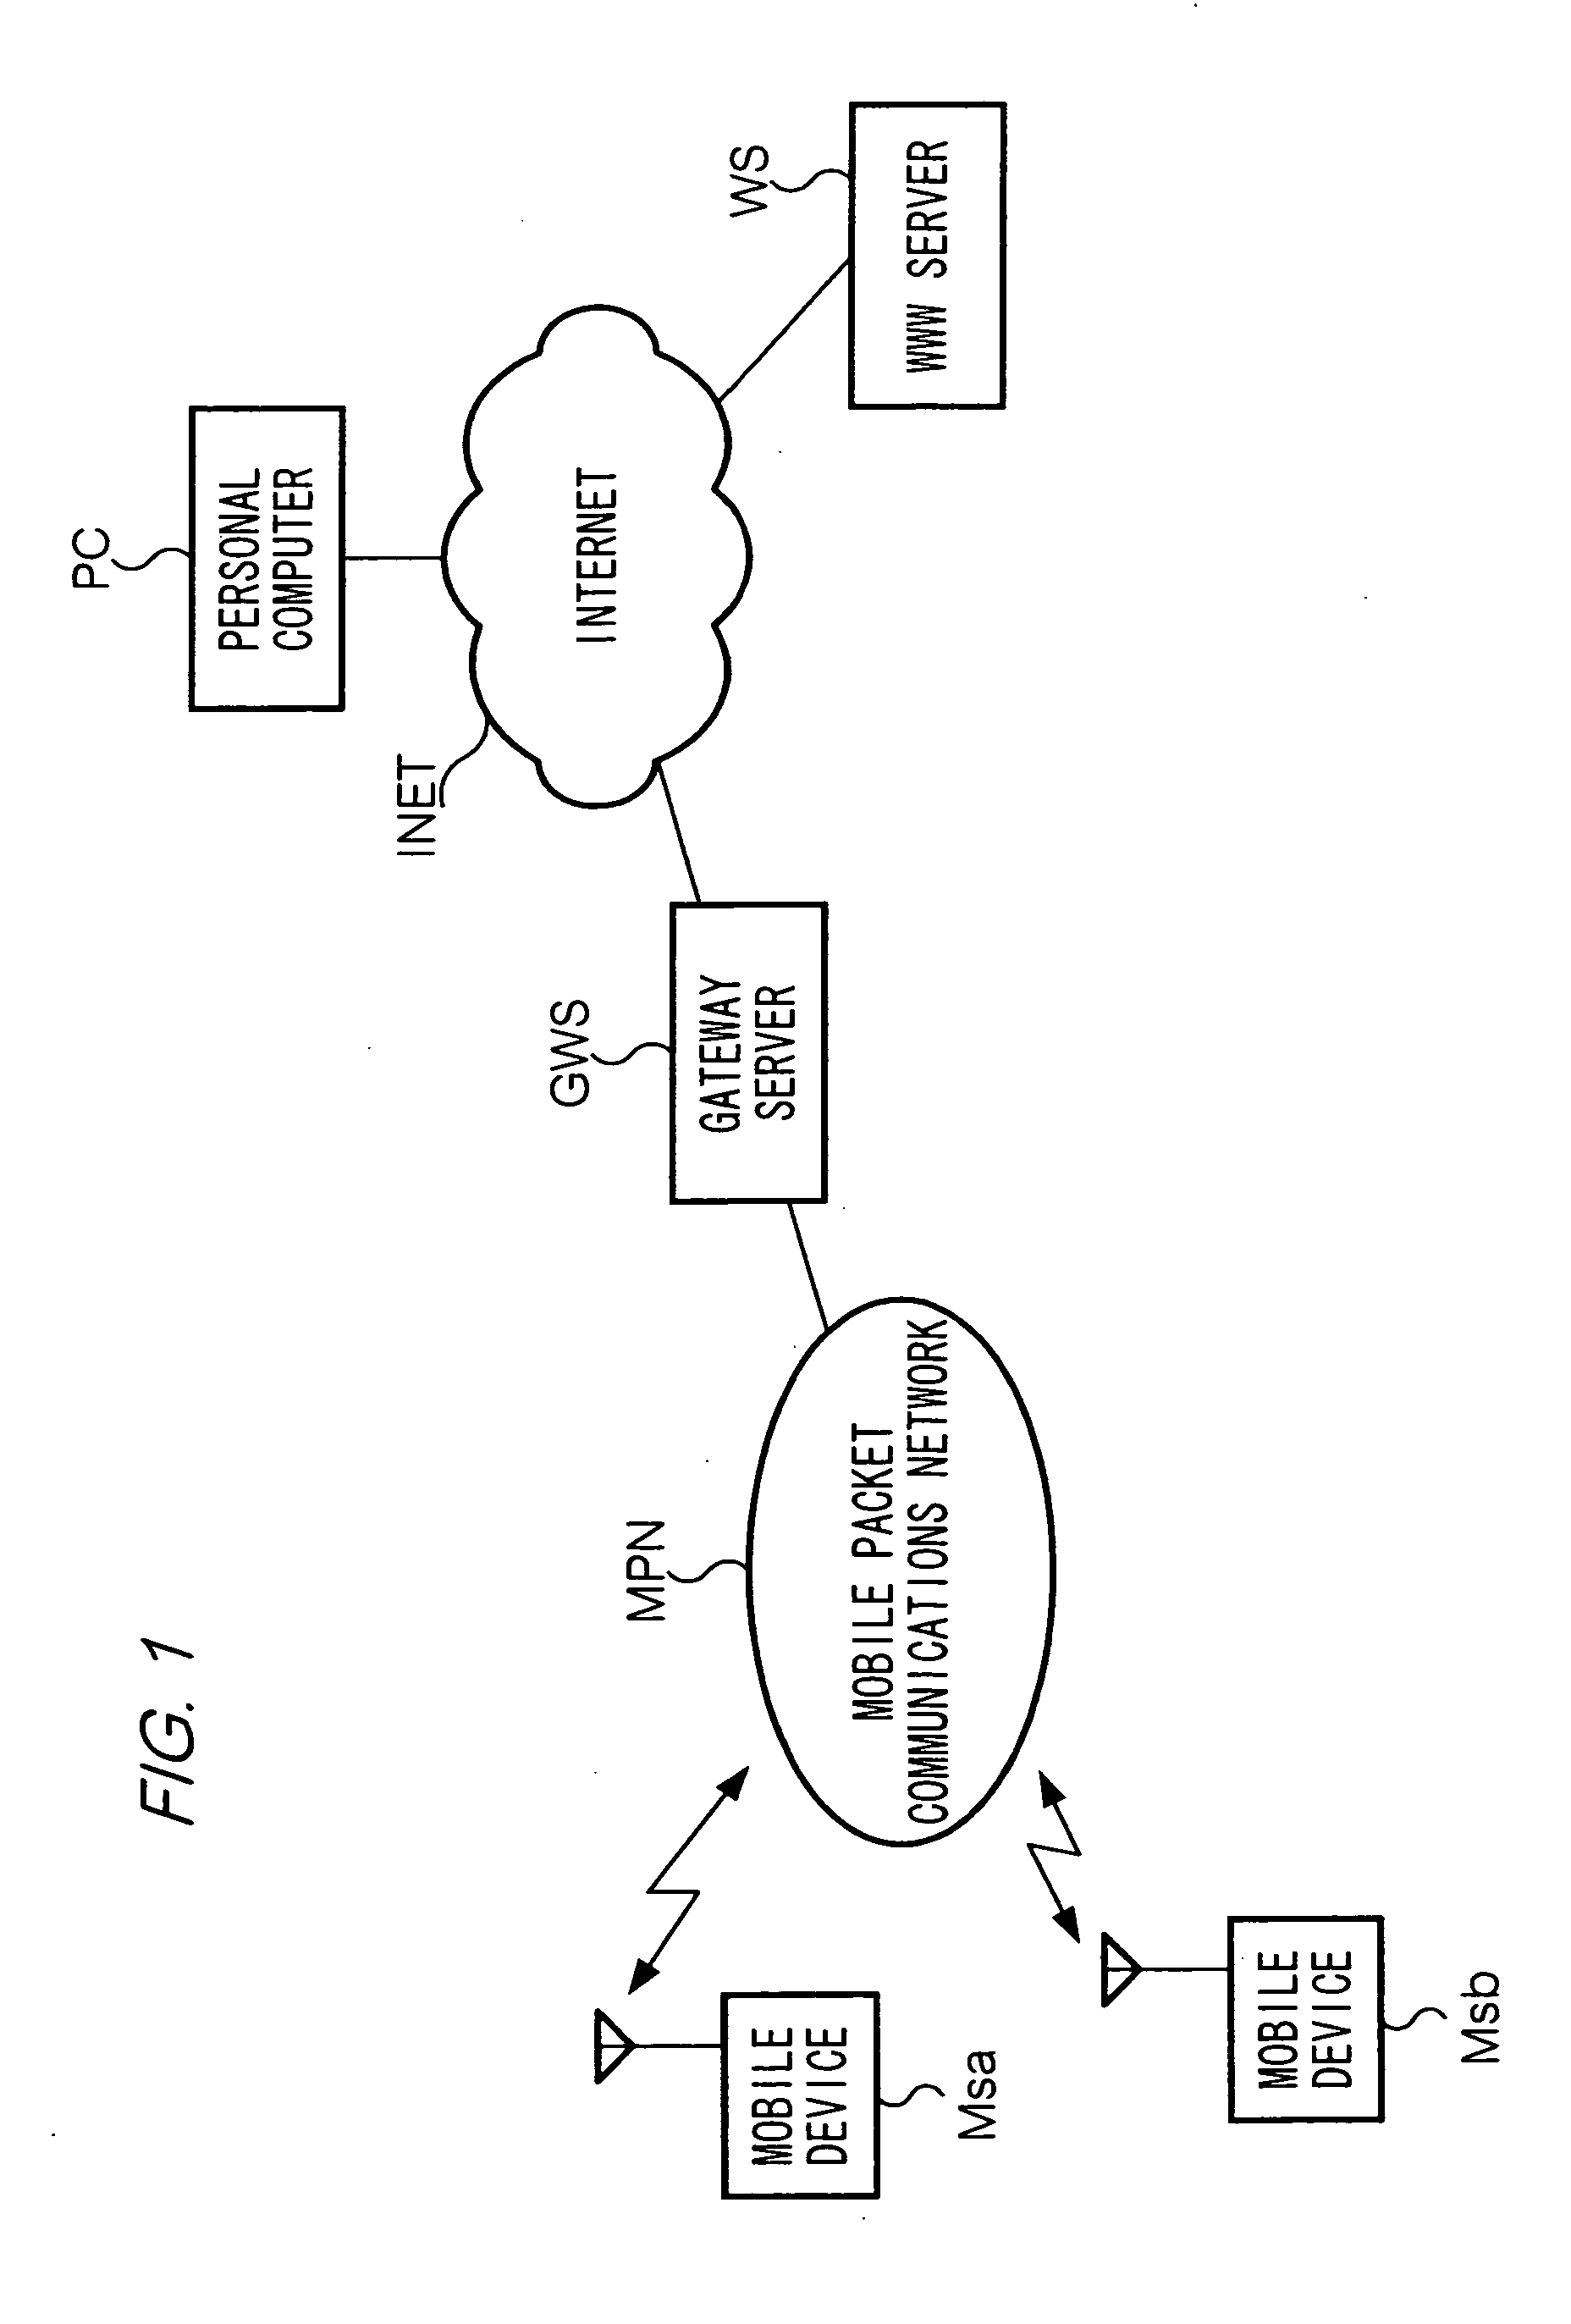 Electronic mail delivery system, mail server, and mail client